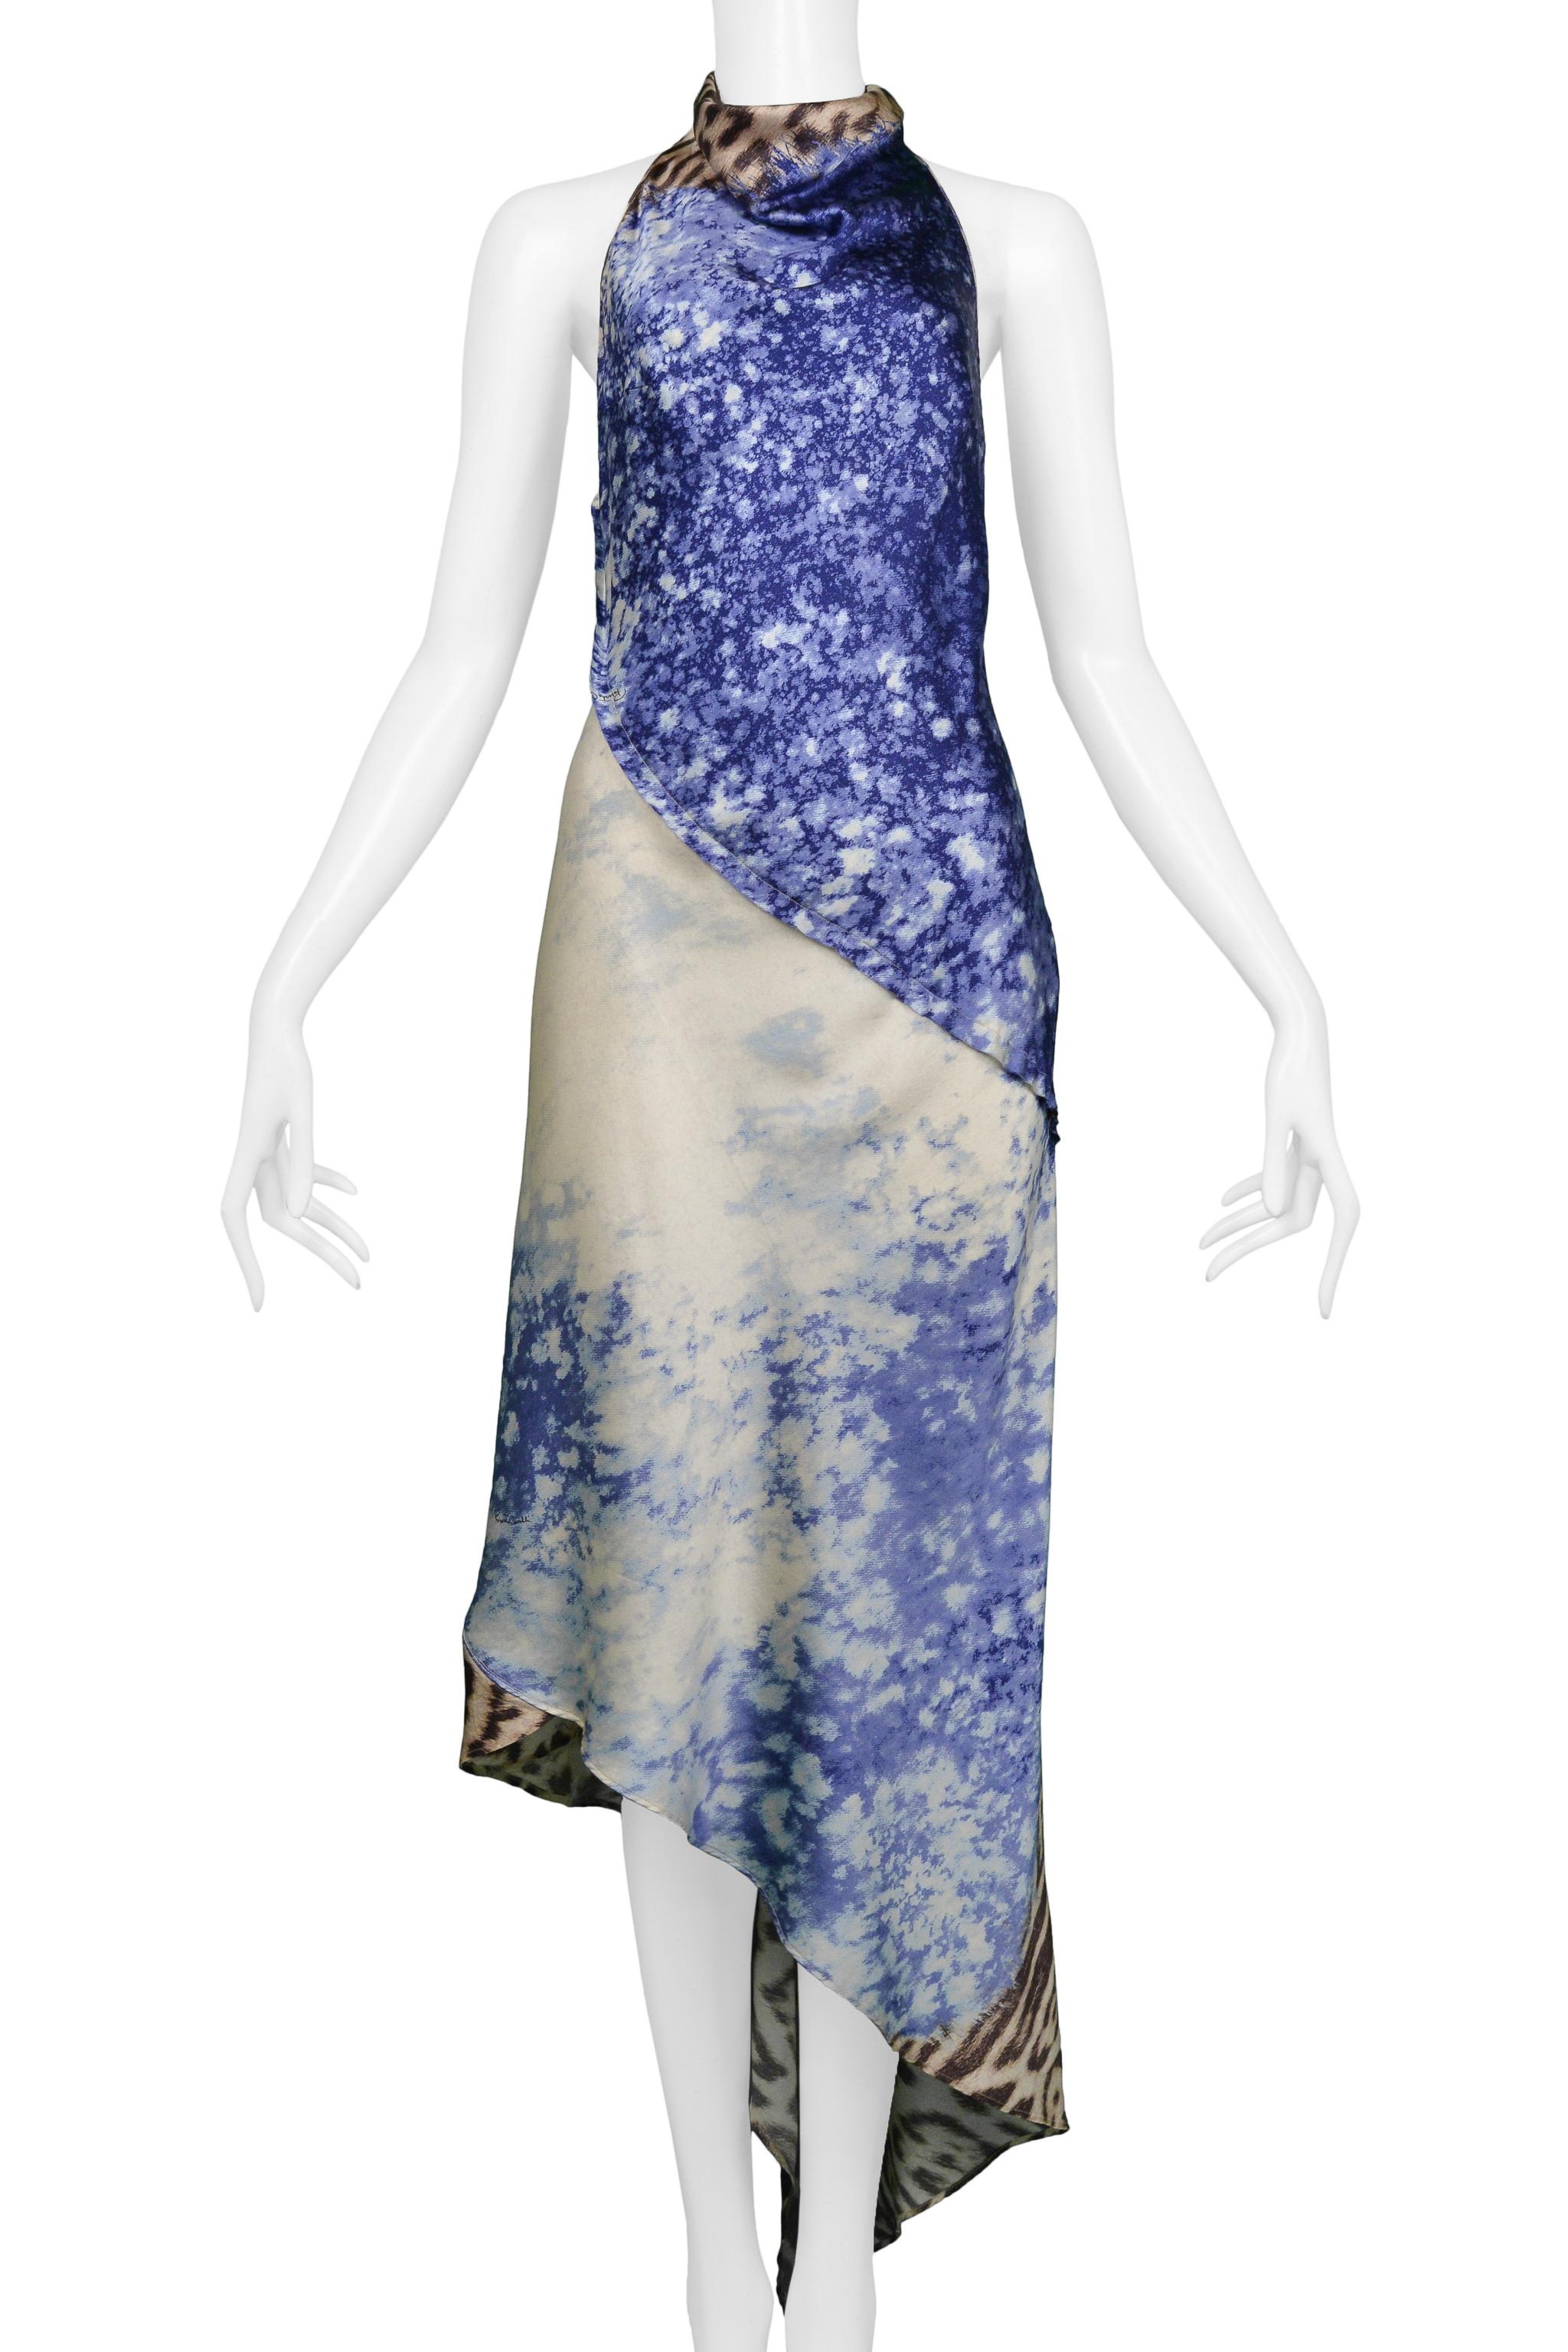 Resurrection Vintage is excited to present a vintage Roberto Cavalli animal and acid print silk halter neck dress featuring a halter bodice, cowl neck, gold hardware bodice, skinny straps, raw edges, diagonal seams and hem, high-low length. From the